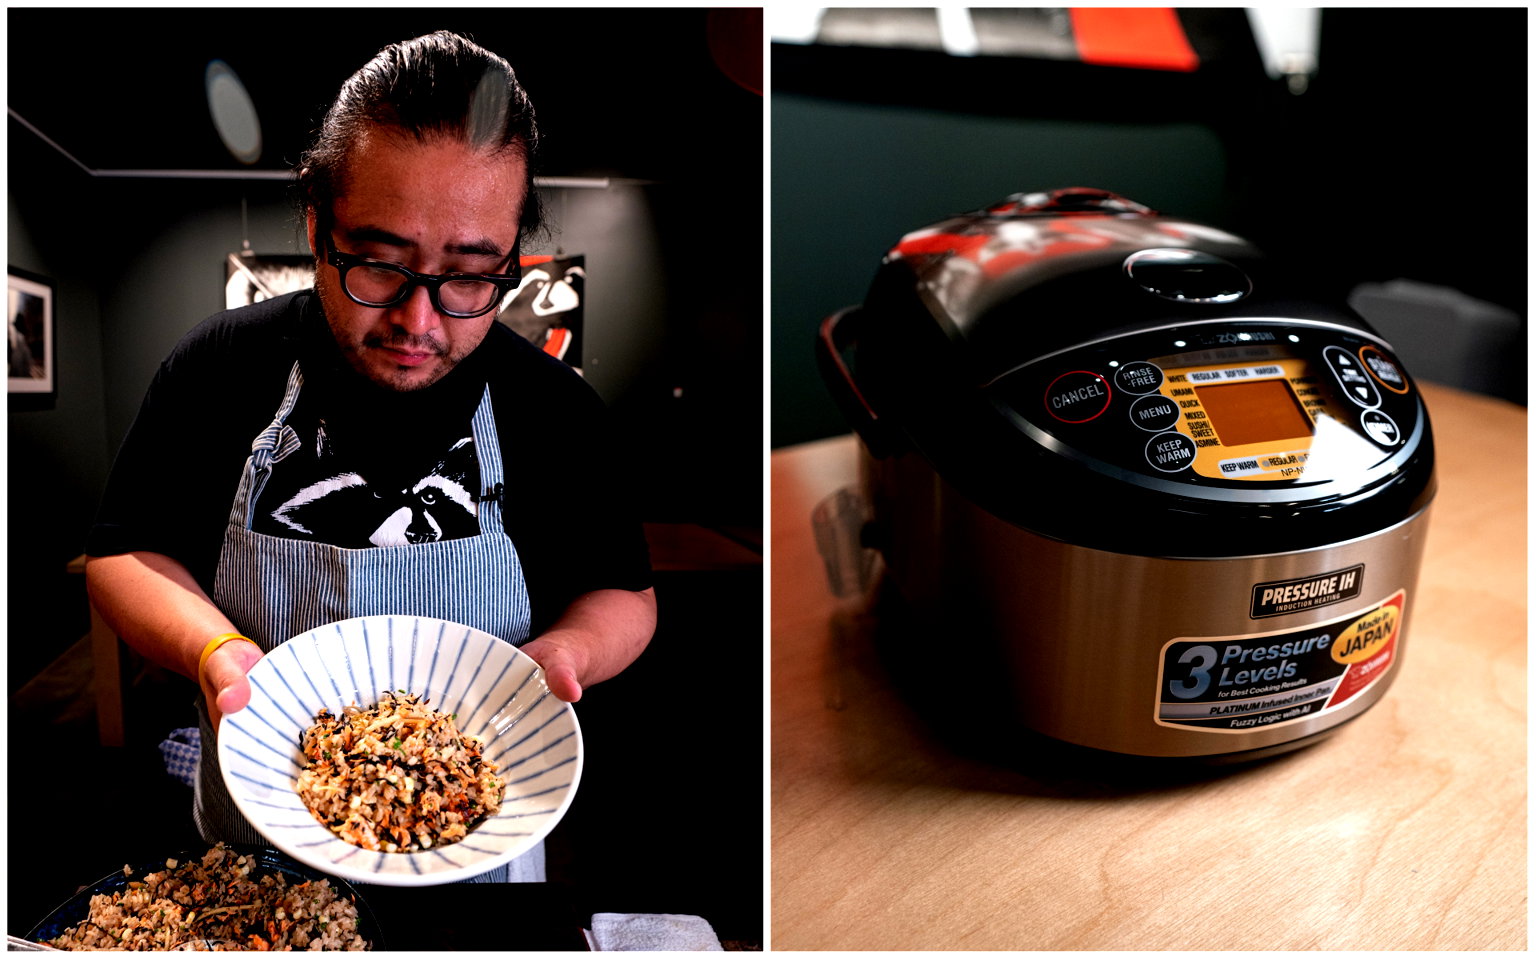 The Best Rice Cooker, According To A Sushi Chef